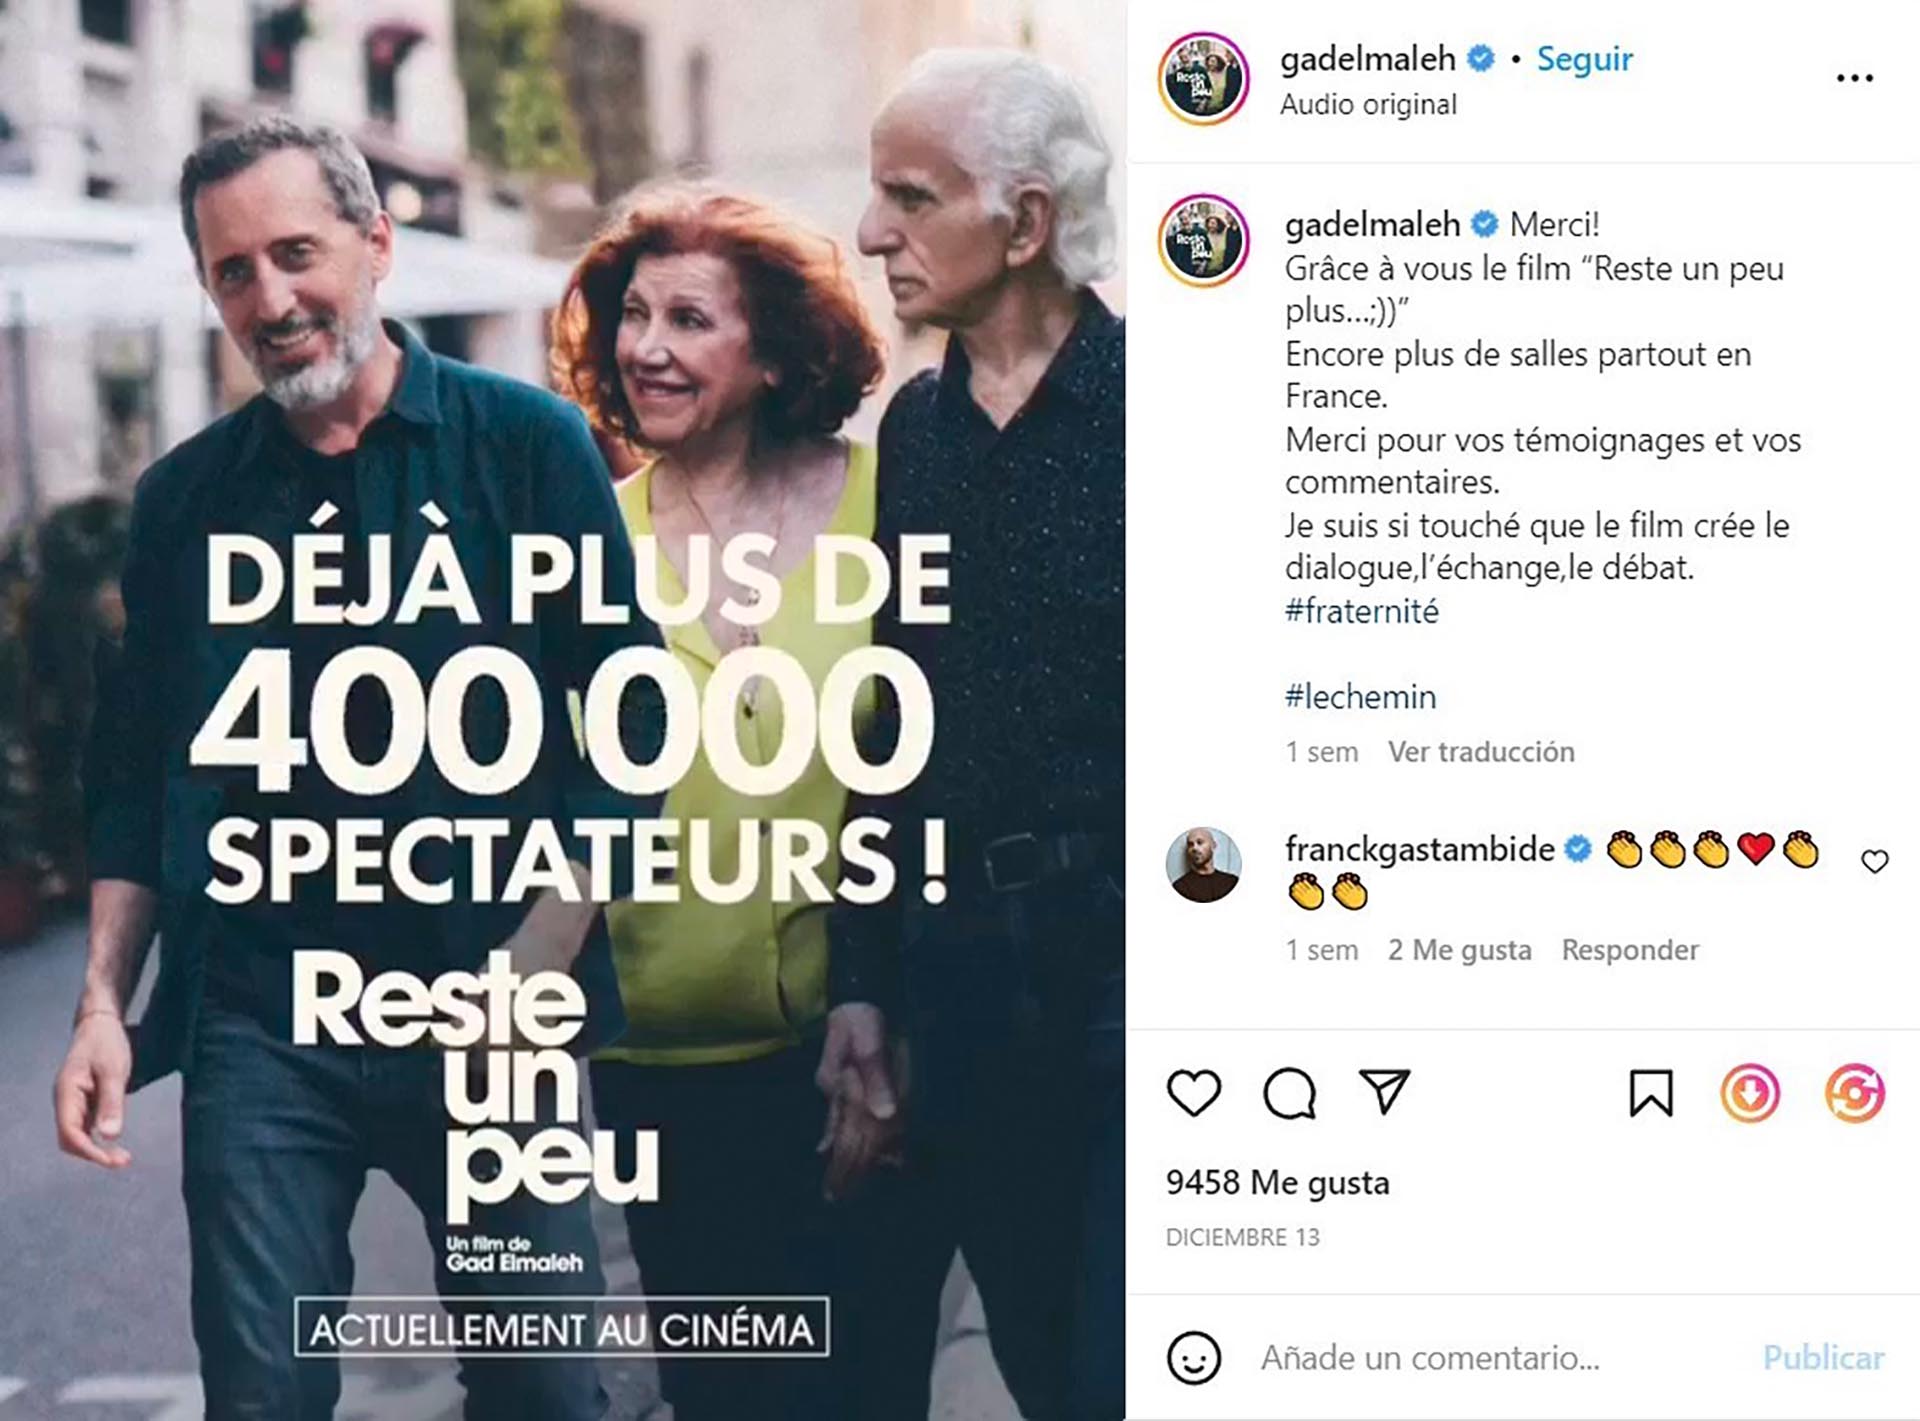 On his Instagram, Elmaleh celebrated the number of viewers: with the hashtag brotherhood, it was said "moved" due to the fact that the film "is creating dialogue, exchange, debate"